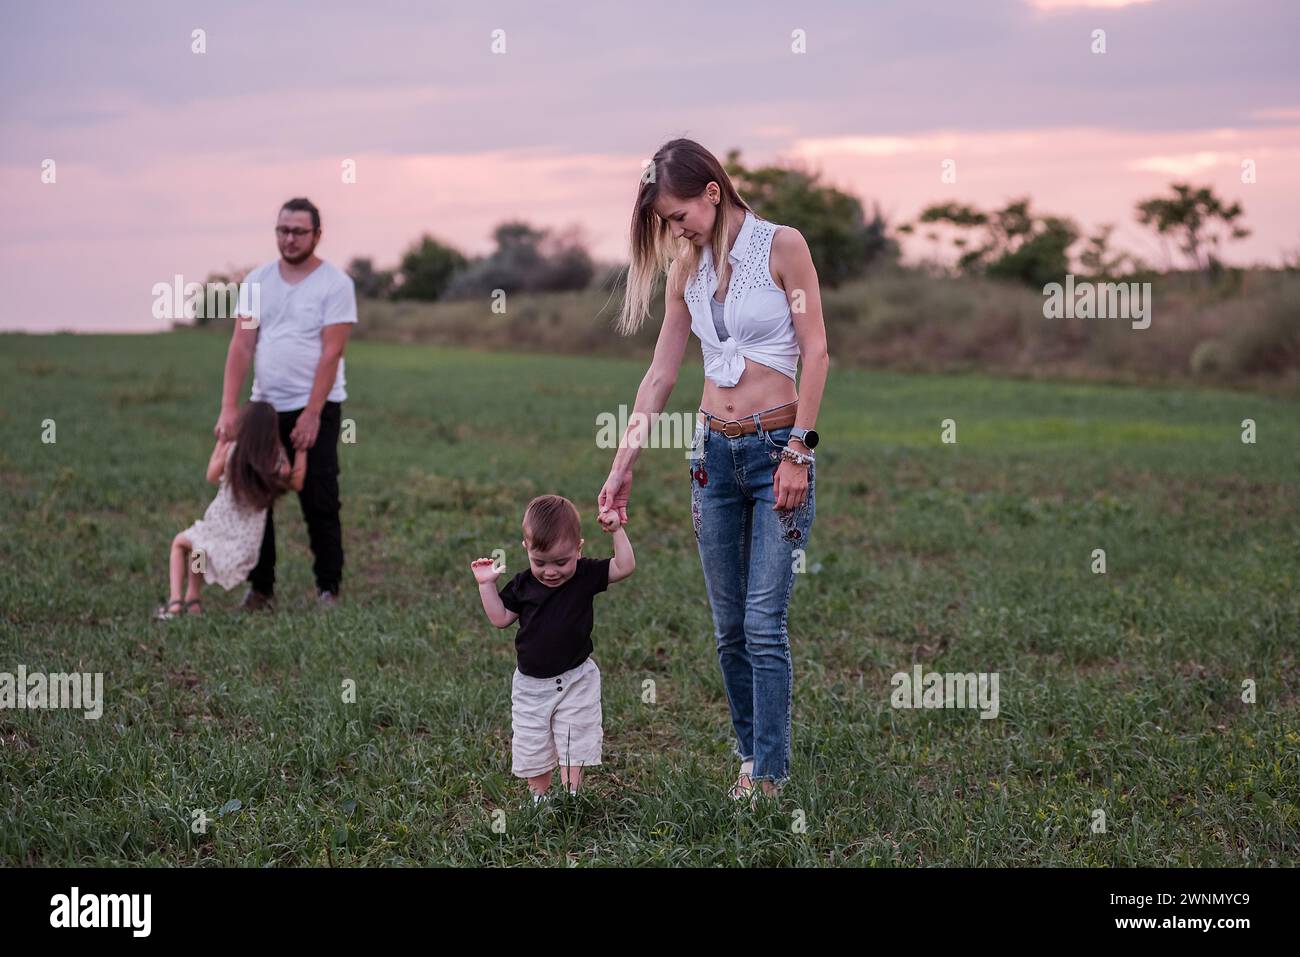 Woman helps toddler walk in a grassy field at sunset, with man and child in the background, capturing a casual, loving diversity family moment in the Stock Photo